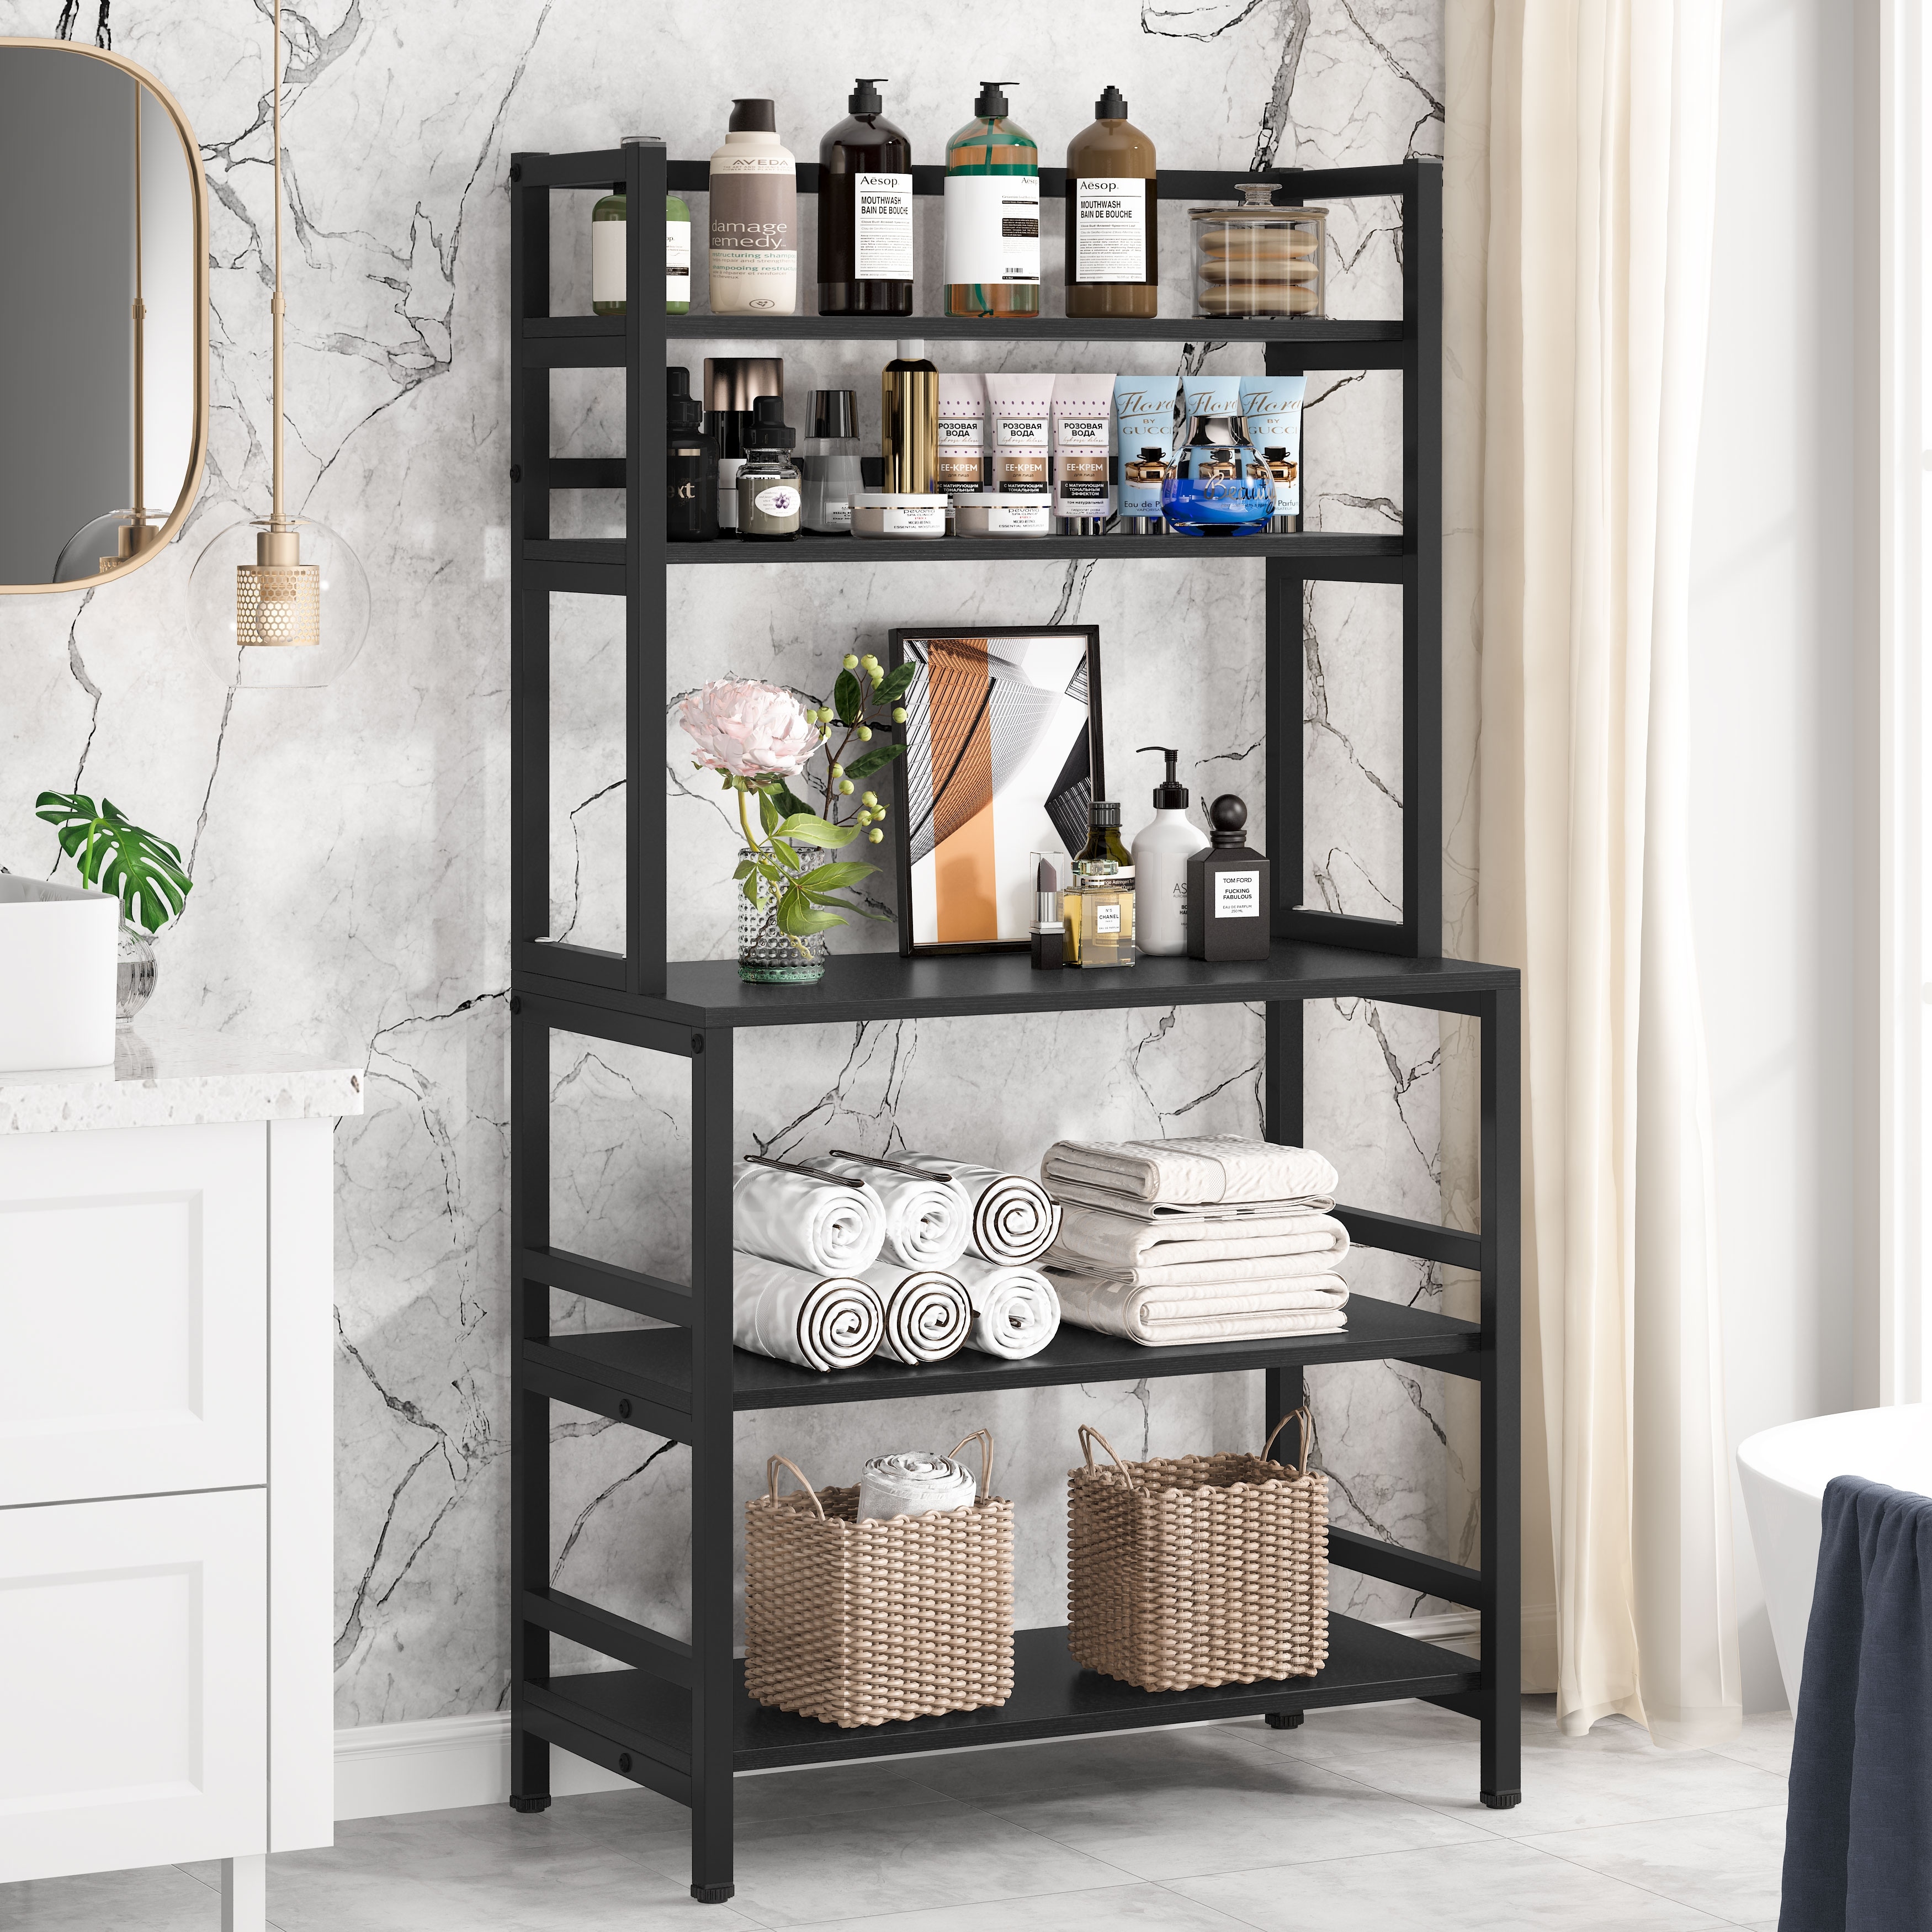 https://ak1.ostkcdn.com/images/products/is/images/direct/816bb2e5e84dd5c1a25e48efef9e664f59e37a6a/5-Tier-Kitchen-Bakers-Rack-with-Hutch-Organizer-Rack.jpg